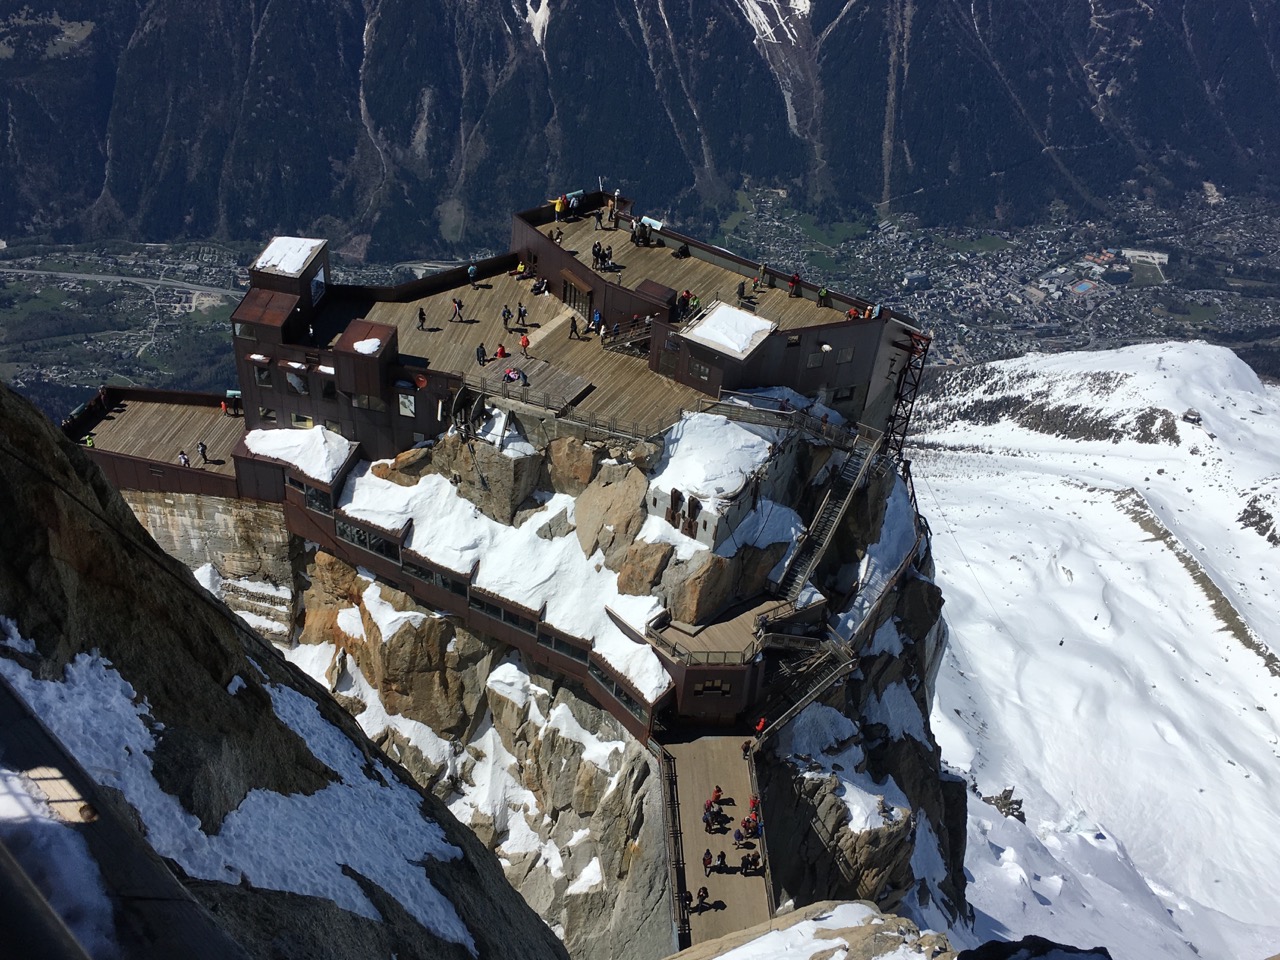 Would today be the day we finally make it up the Aiguille du Midi?